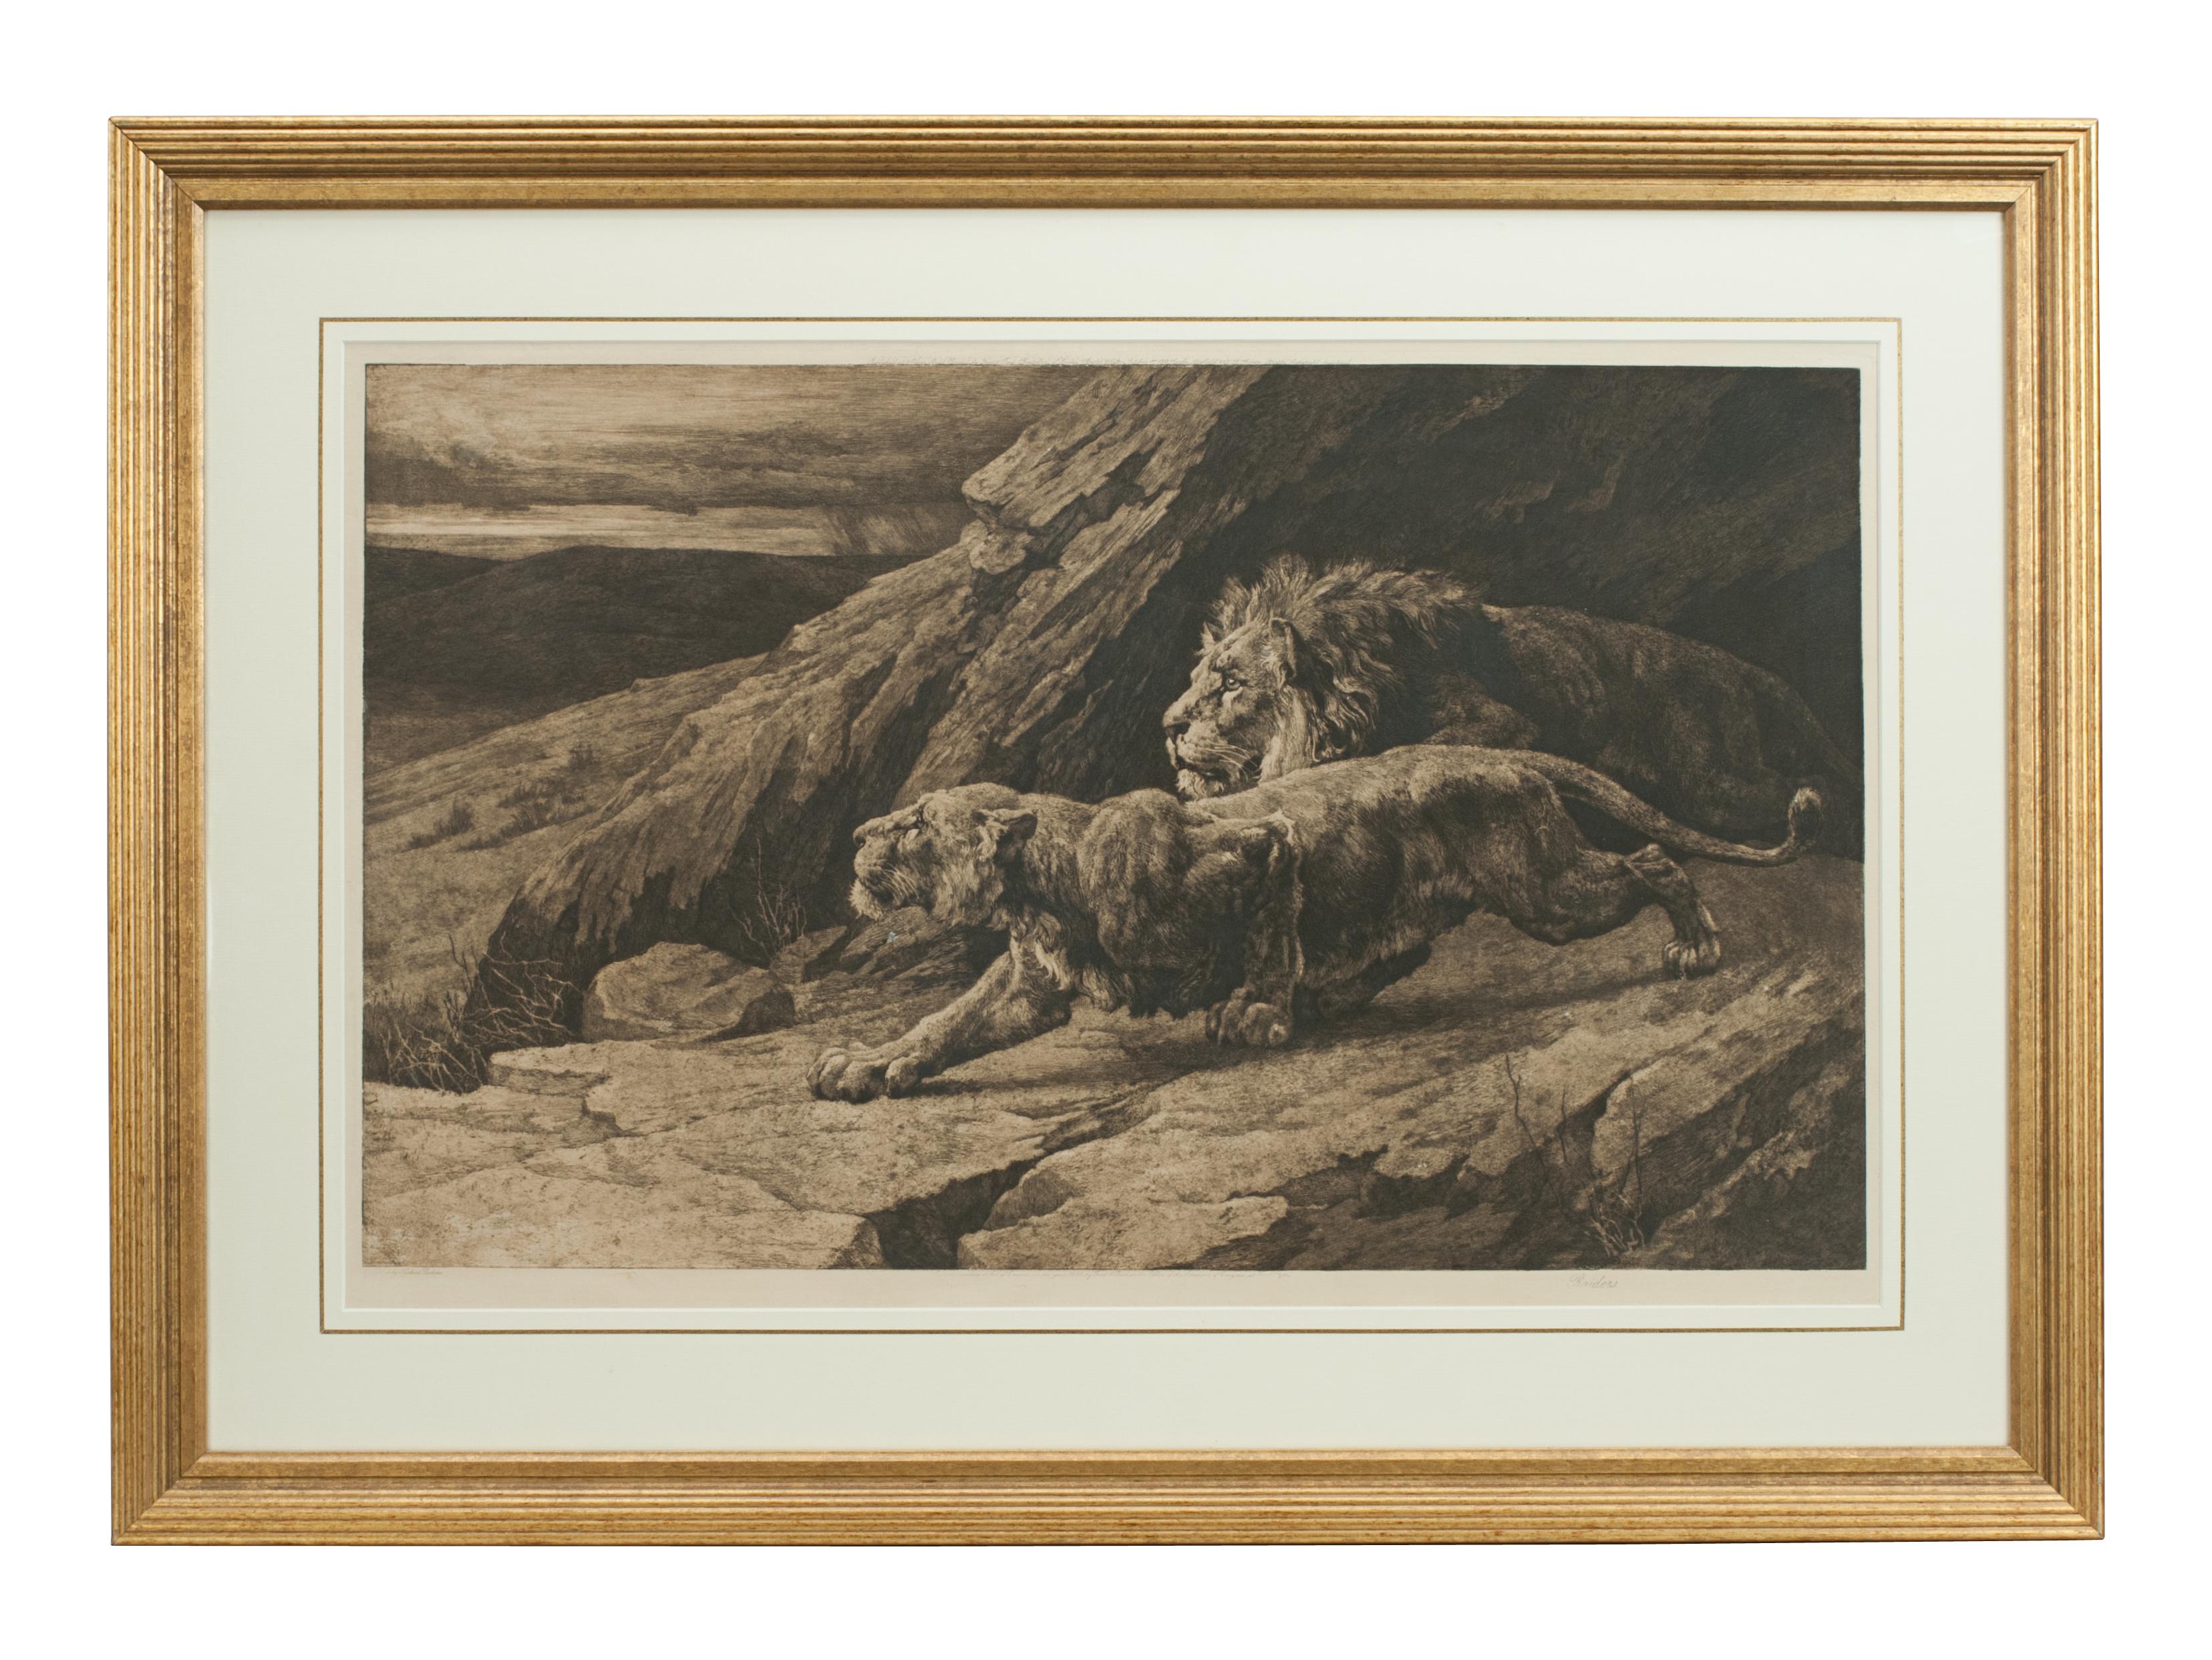 Raiders by Herbert Dicksee.
A framed wildlife etching of a pair of African lions by Herbert Dicksee. The picture shows a pair of crouching lions between some rocks overlooking the valley below. Published October 1st, 1898 by Frost & Reed and is